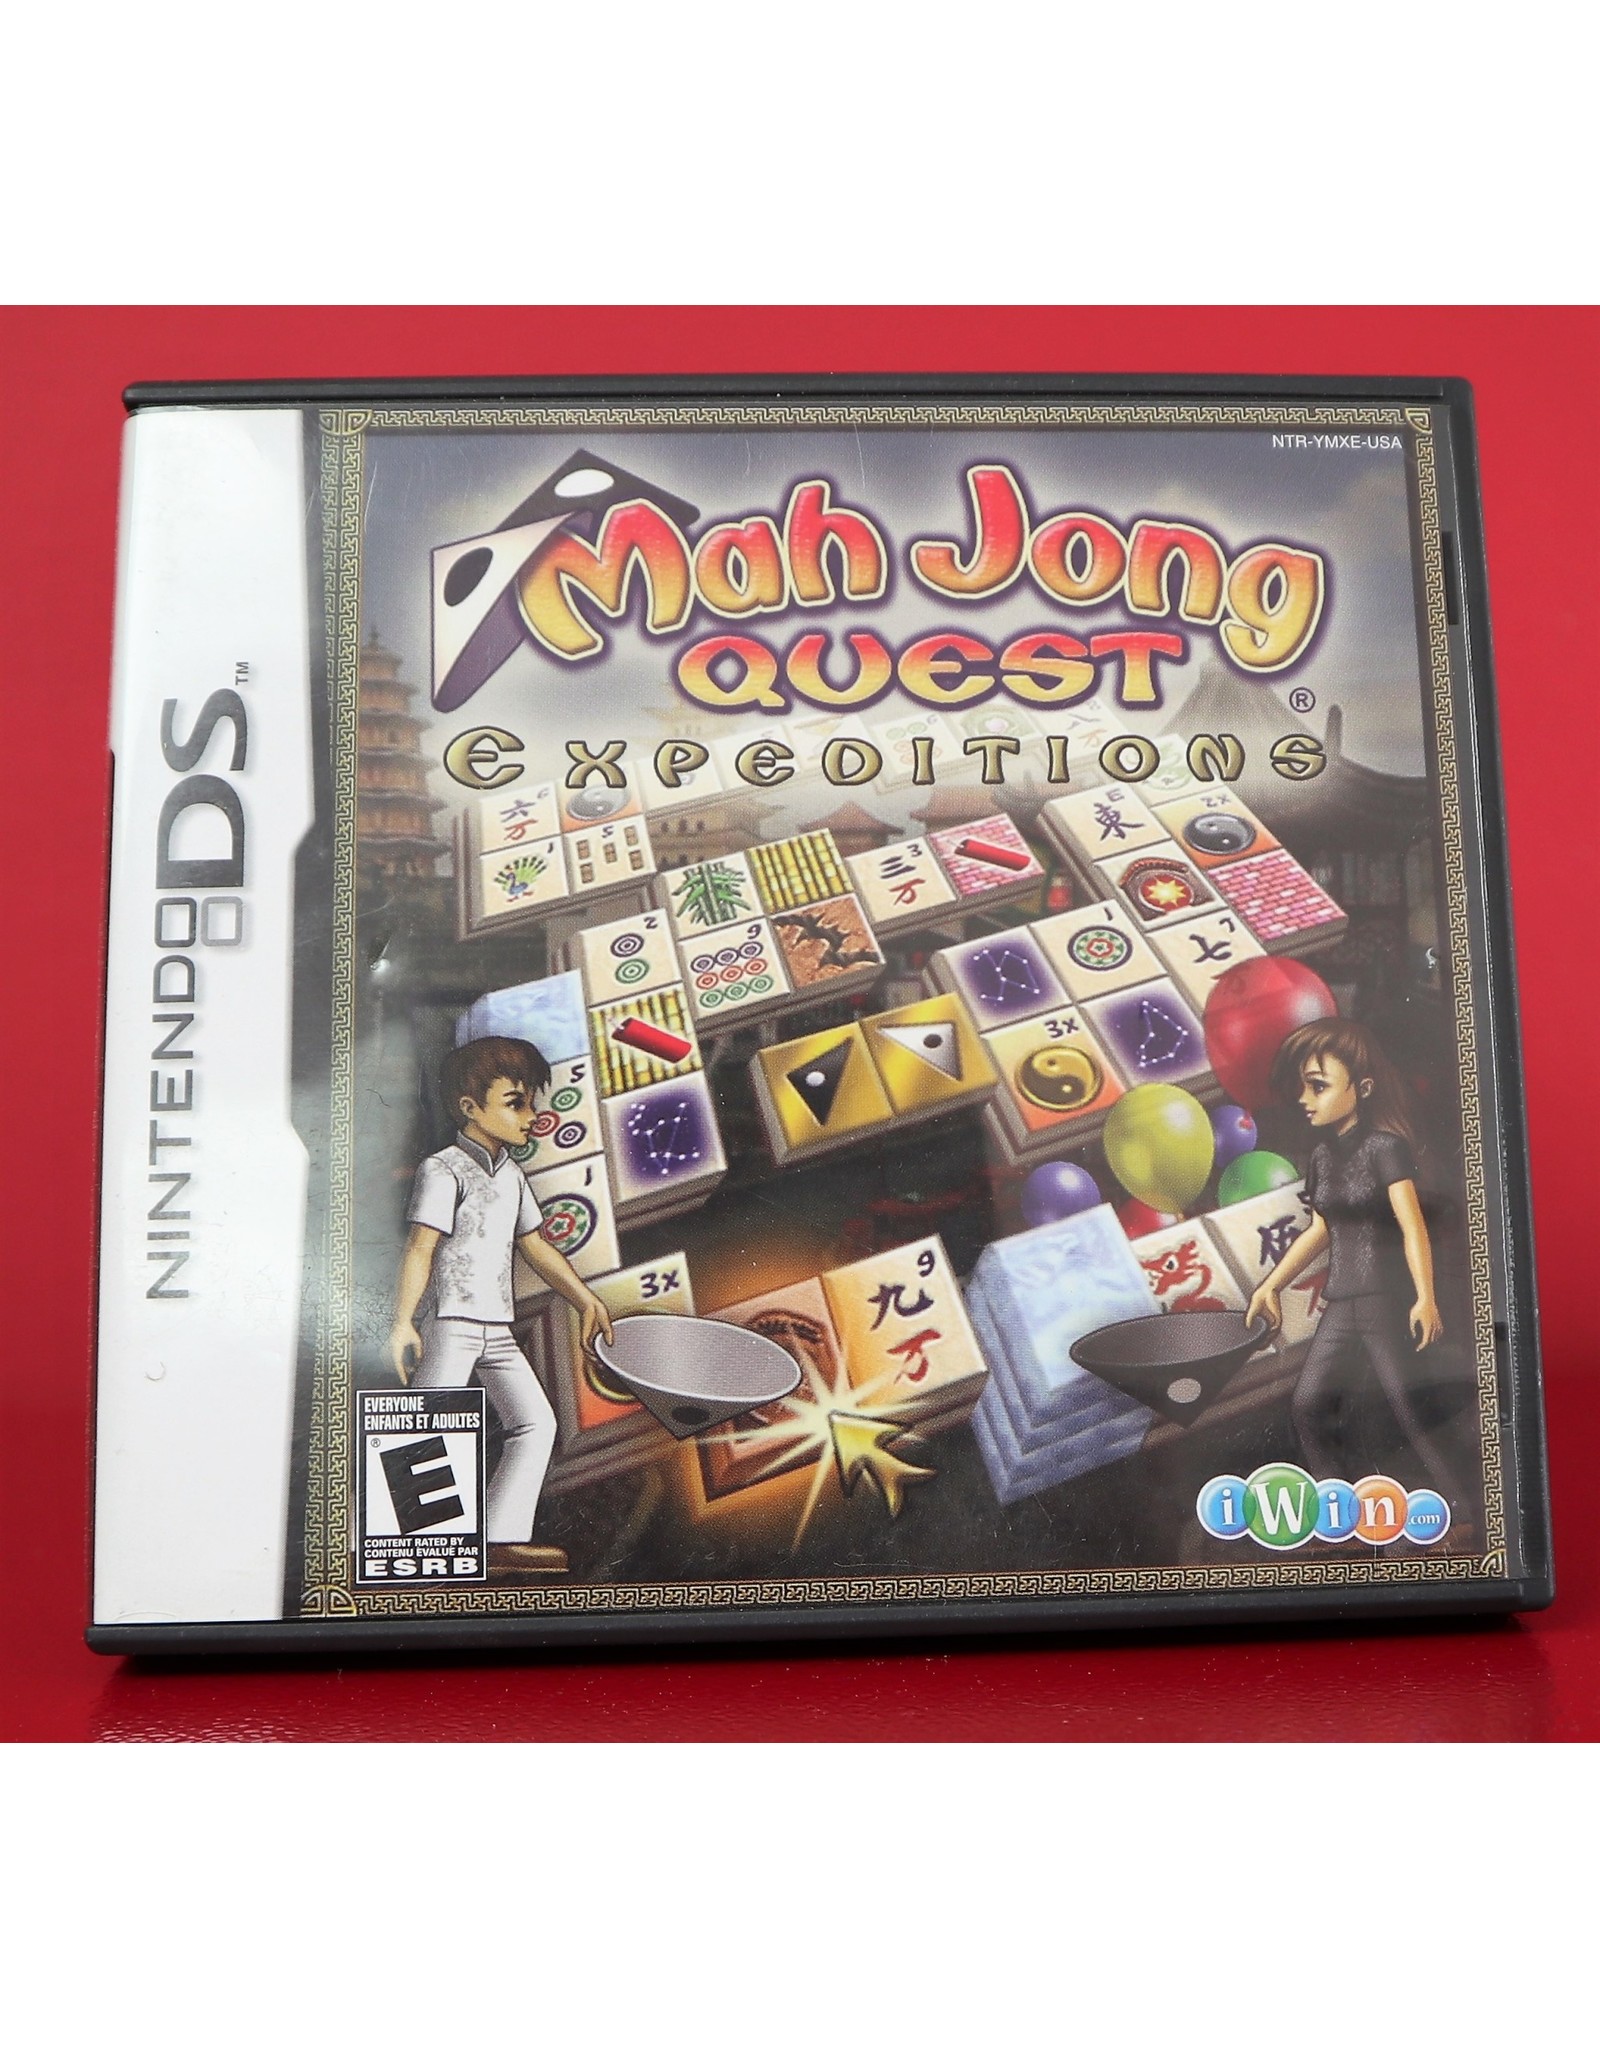 Used Game - Nintendo DS - Mahjong Quest: Expeditions [CIB]